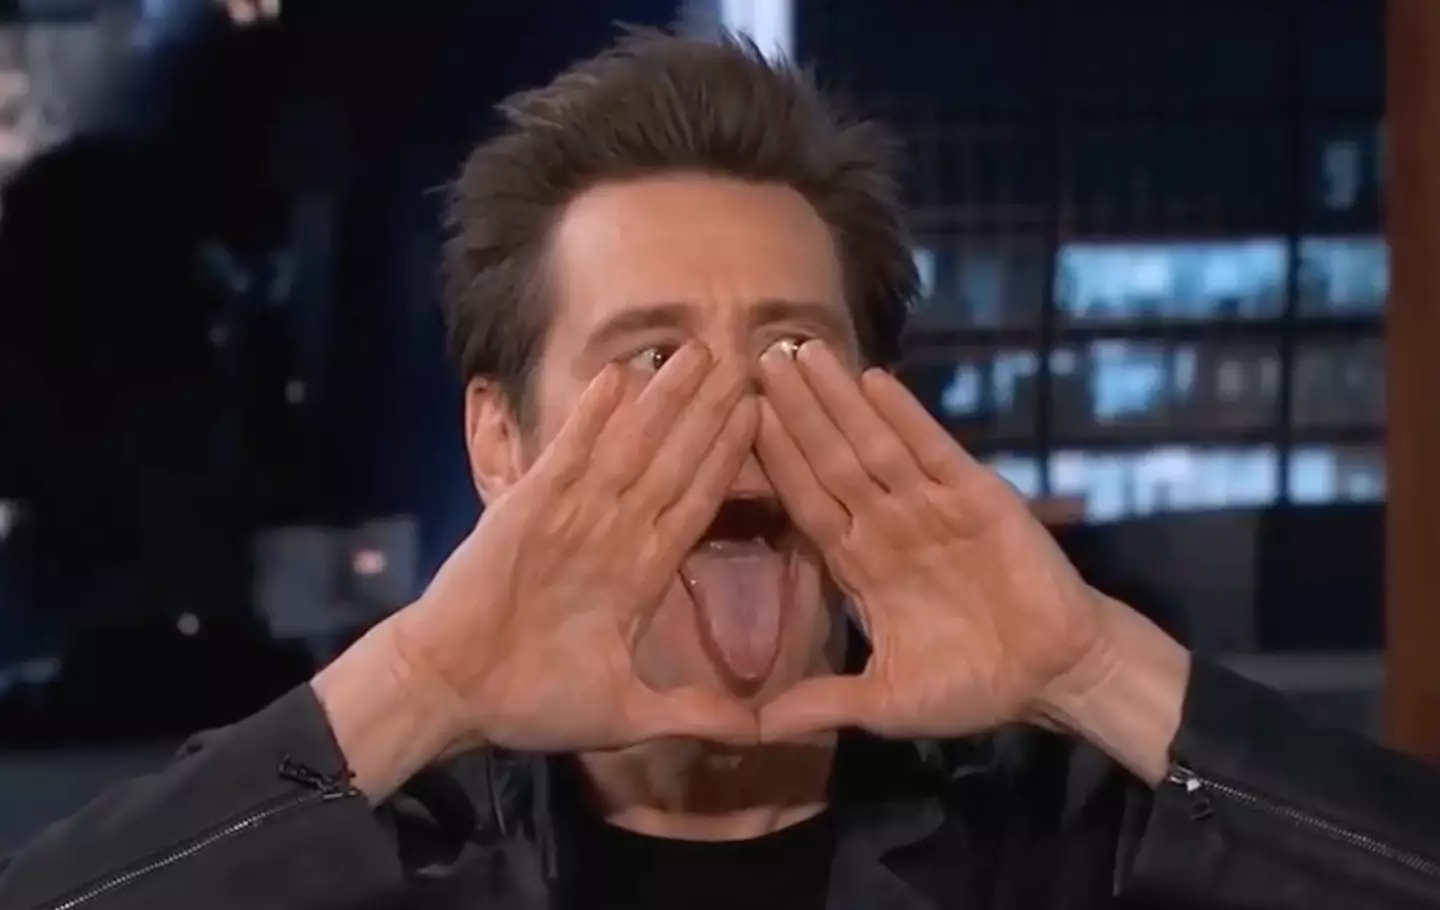 Carrey insisted Kimmel knew what the sign meant.